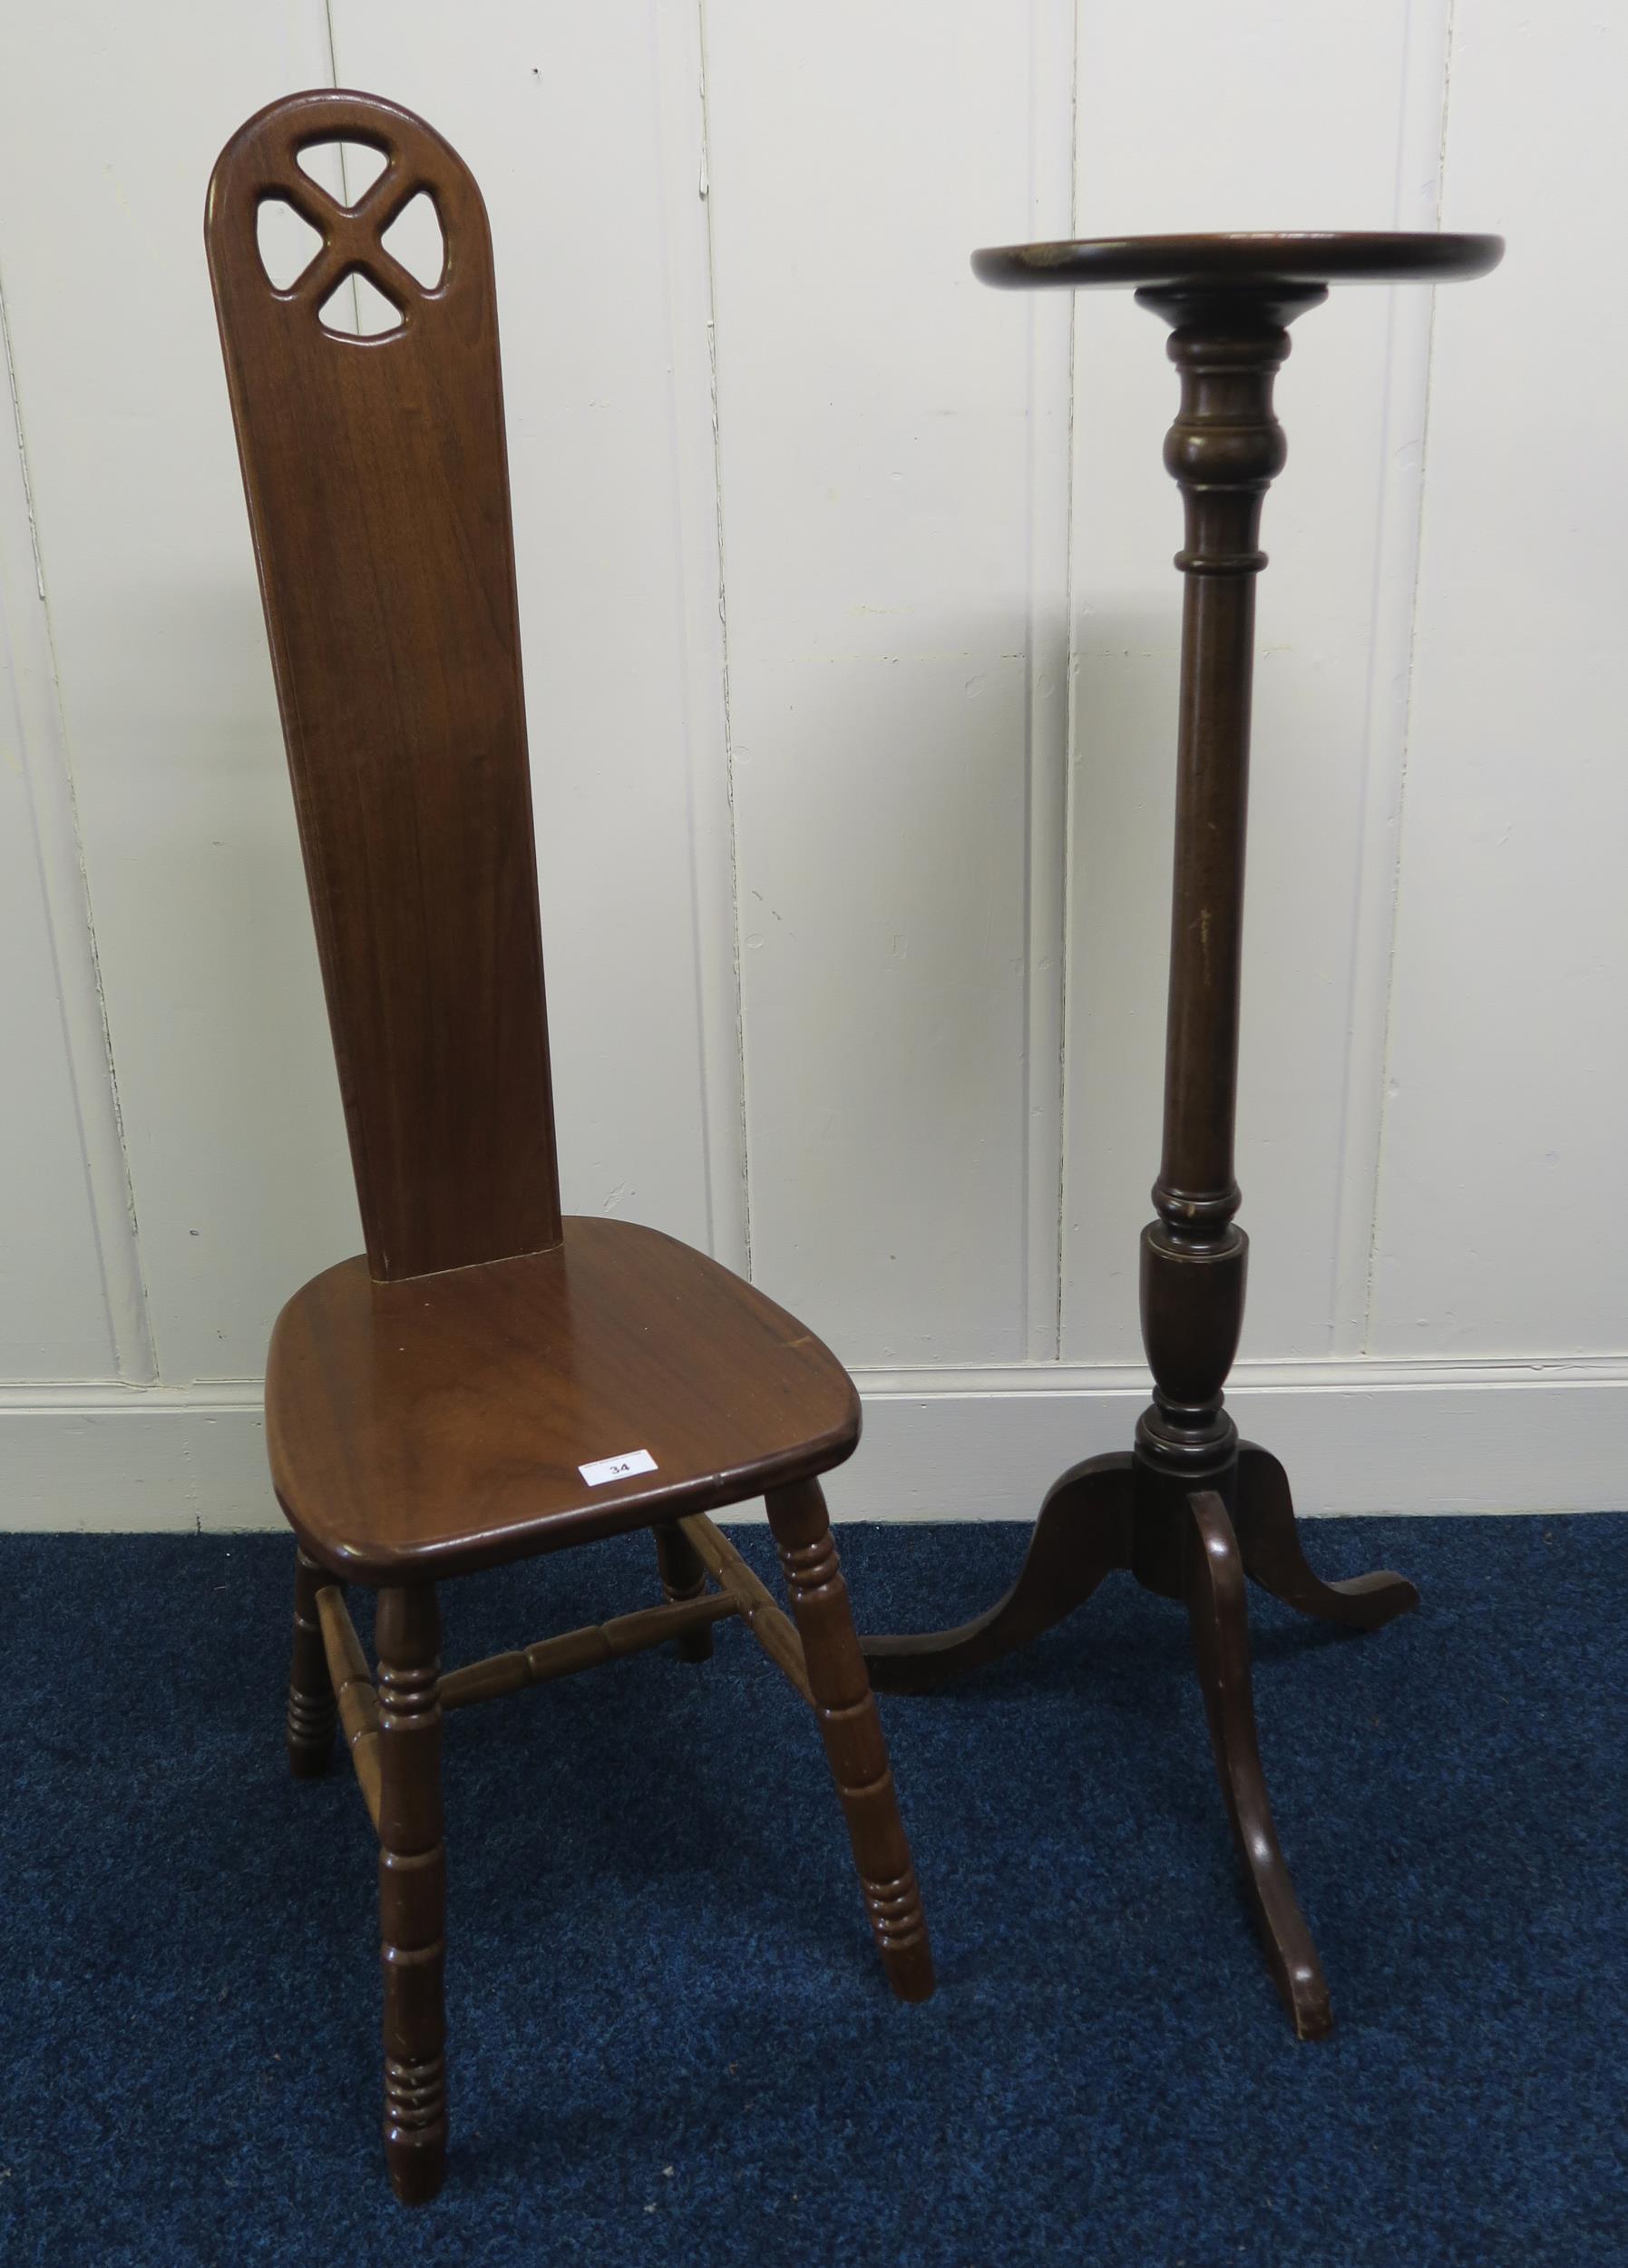 A 20th century mahogany spinning chair and a 20th century mahogany circular topped torchiere